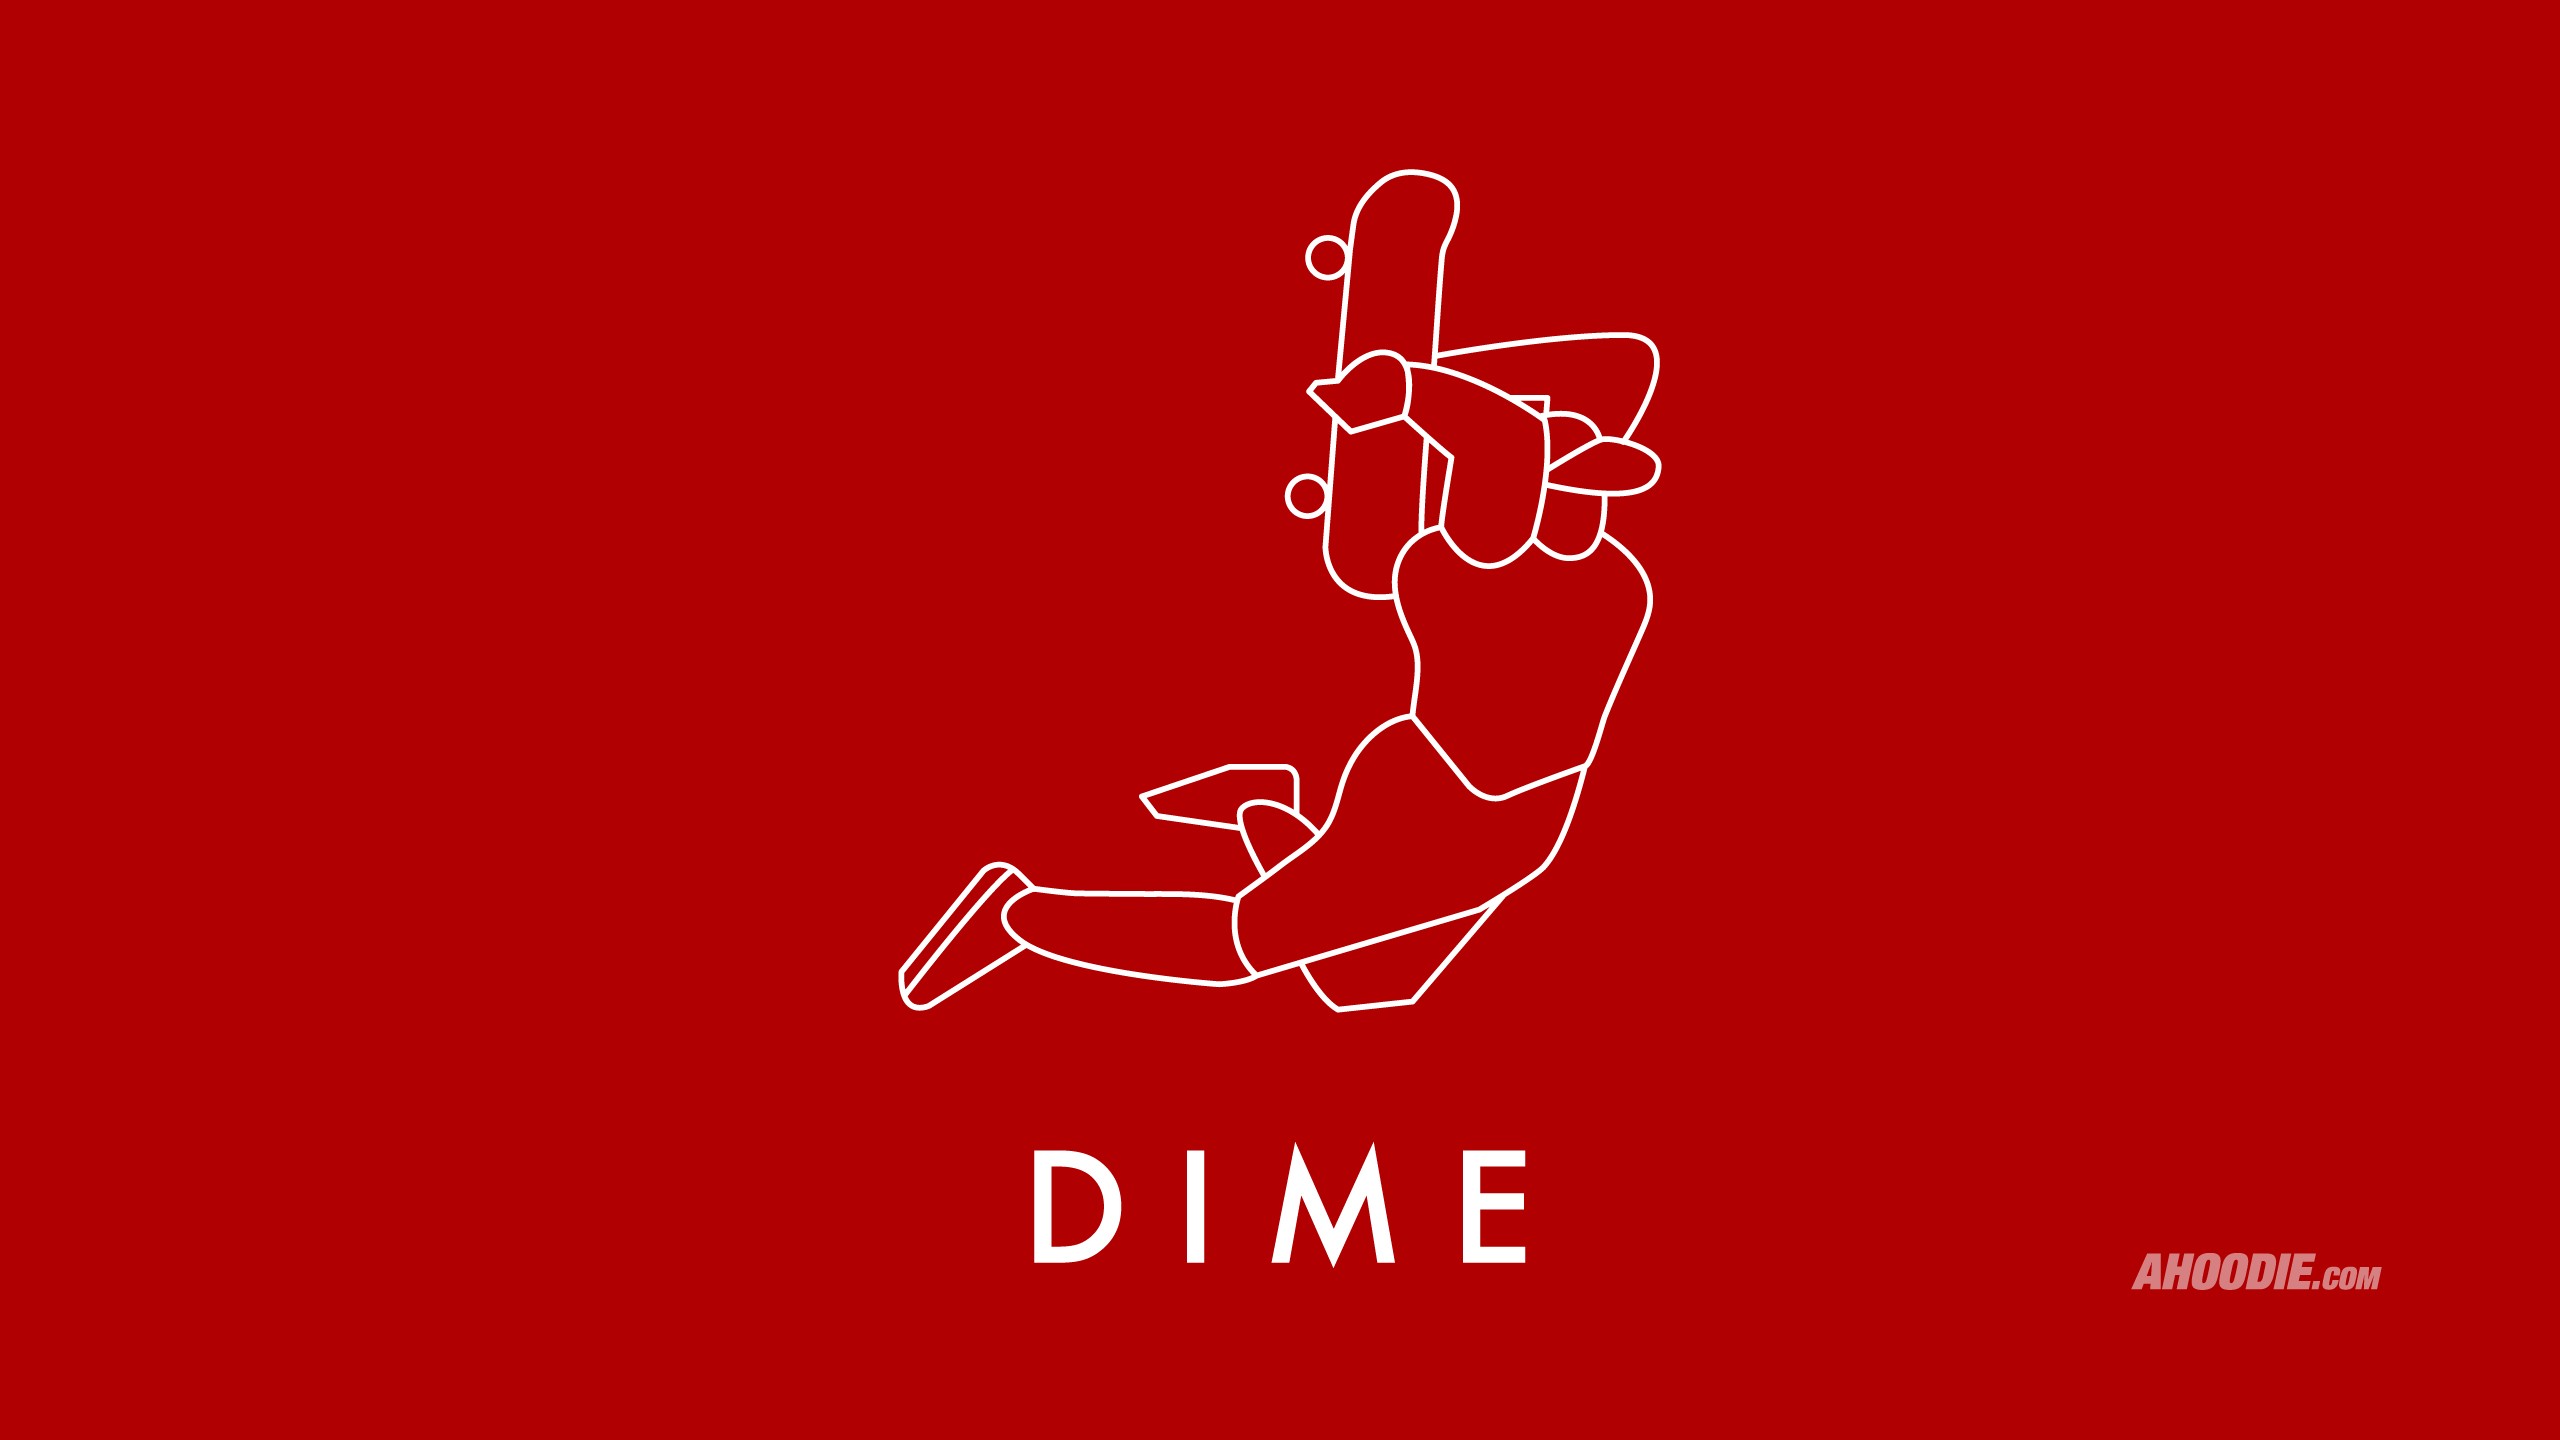 Dime "Dunk" Wallpapers 